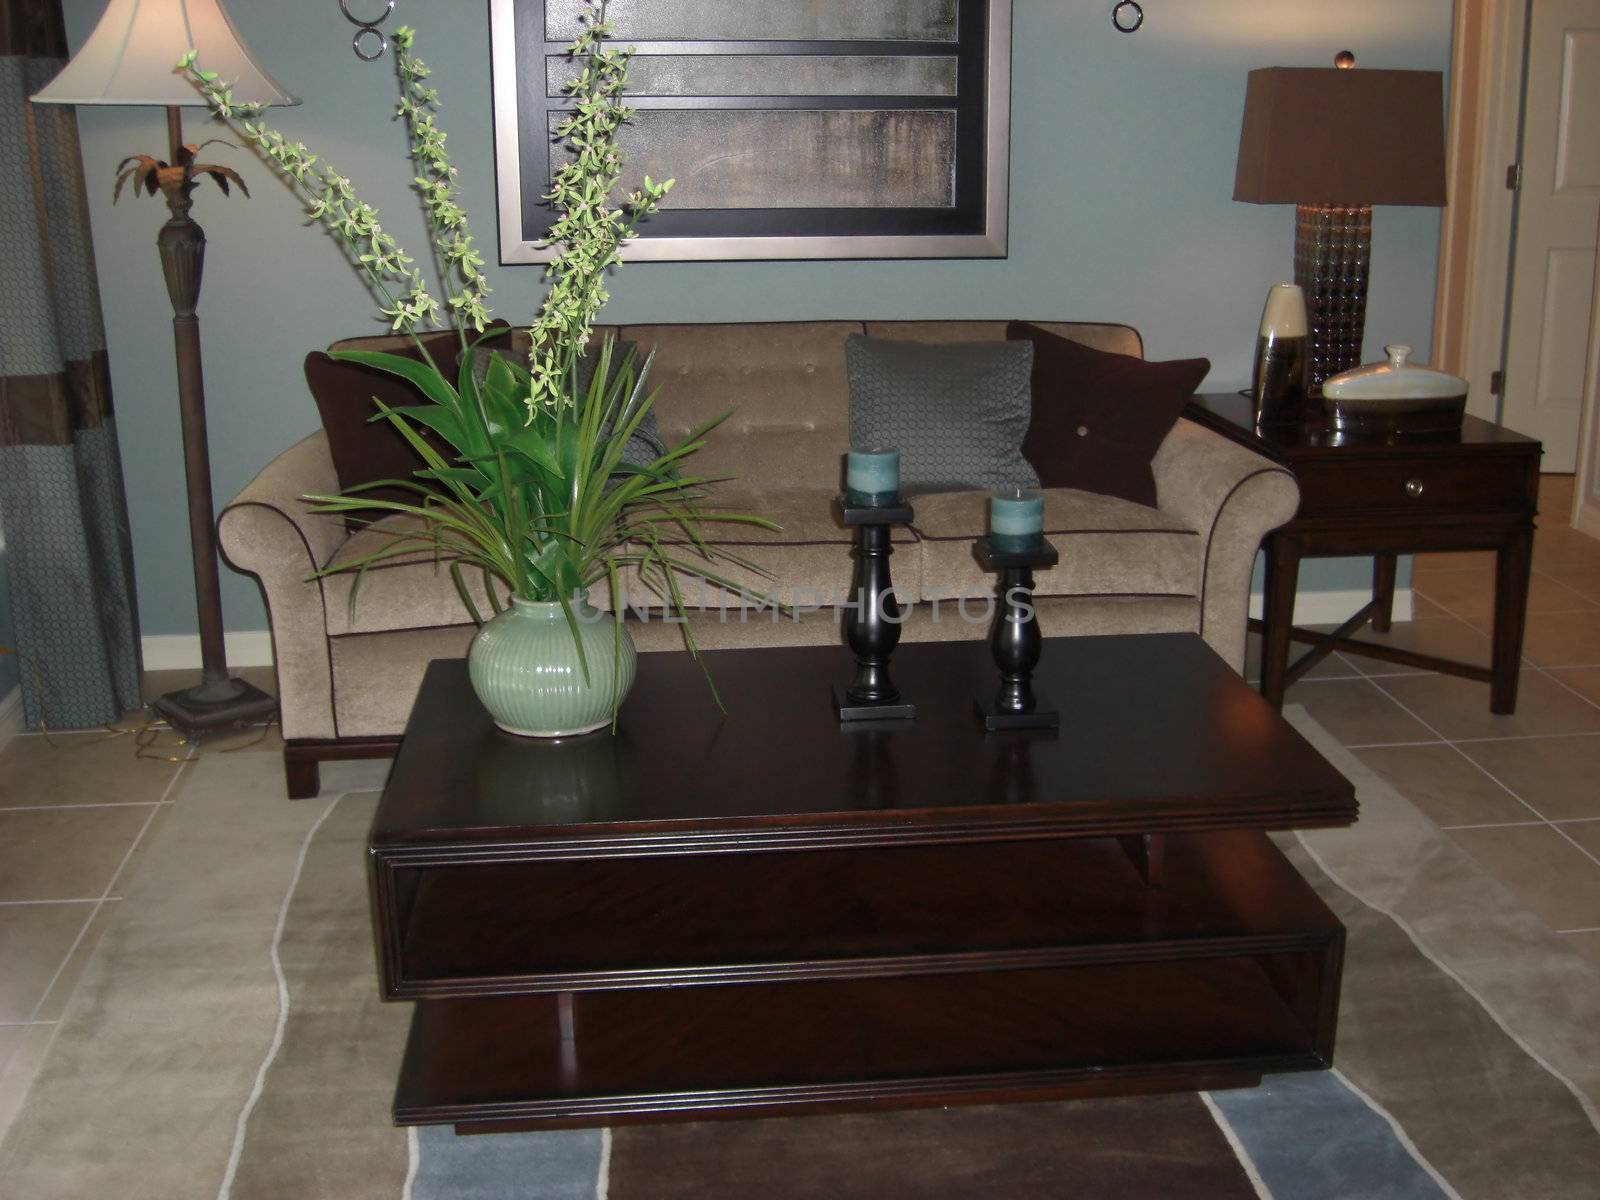 An elegant looking lounge room with a matching color scheme of soft pale blue, rich brown, beige and silver.